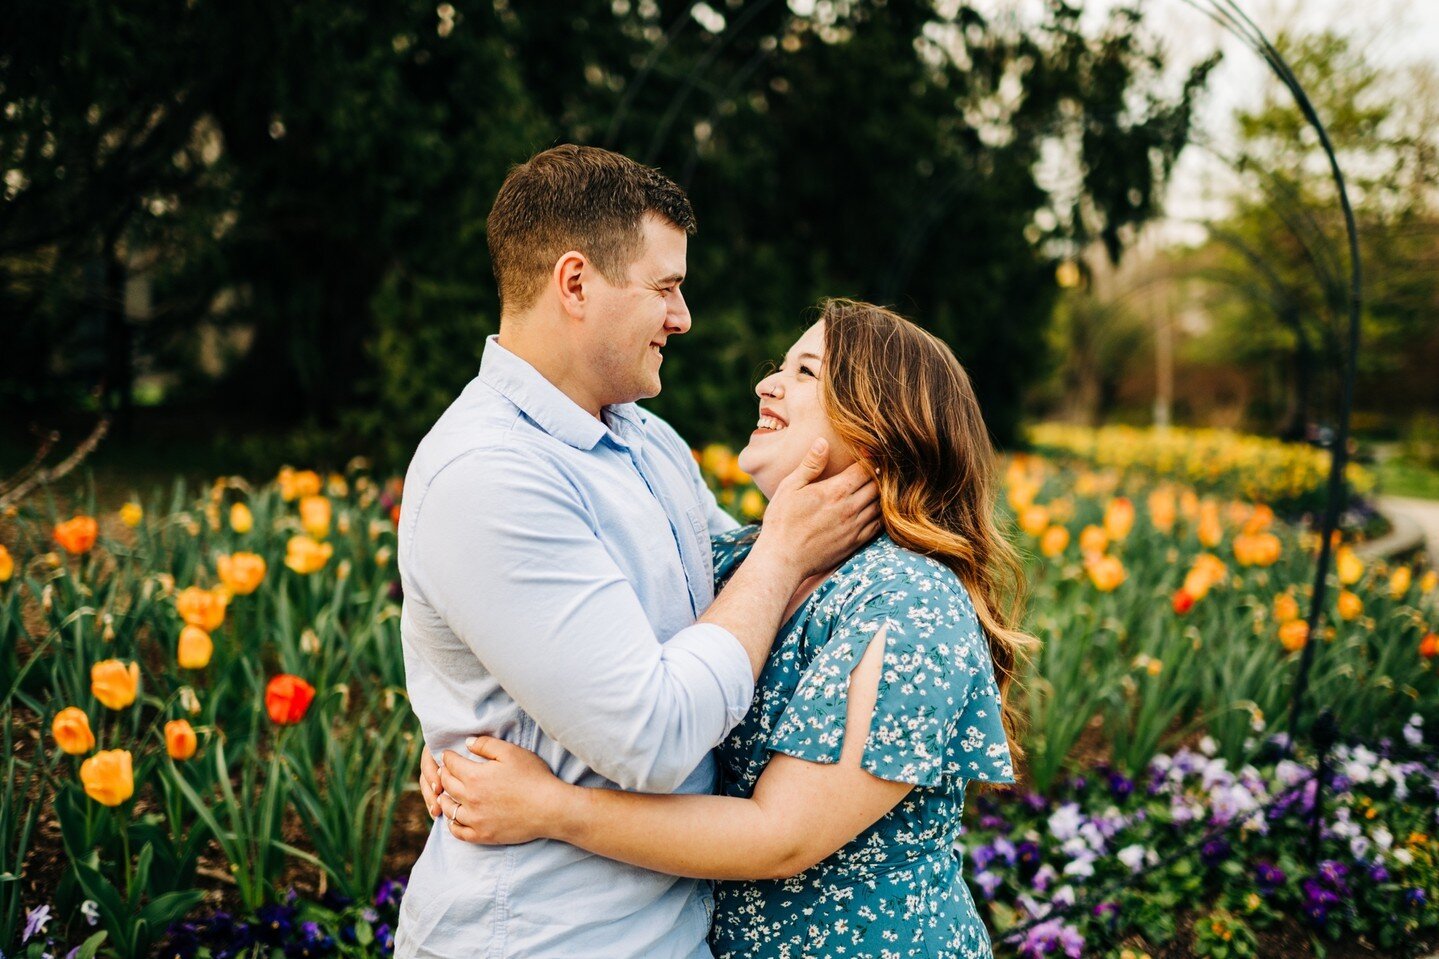 Donnie and his allergies may disagree but I was *thrilled* to be surrounded by flowers for their engagement photos last night! Can't wait to celebrate with these two in one month for their big day 💕